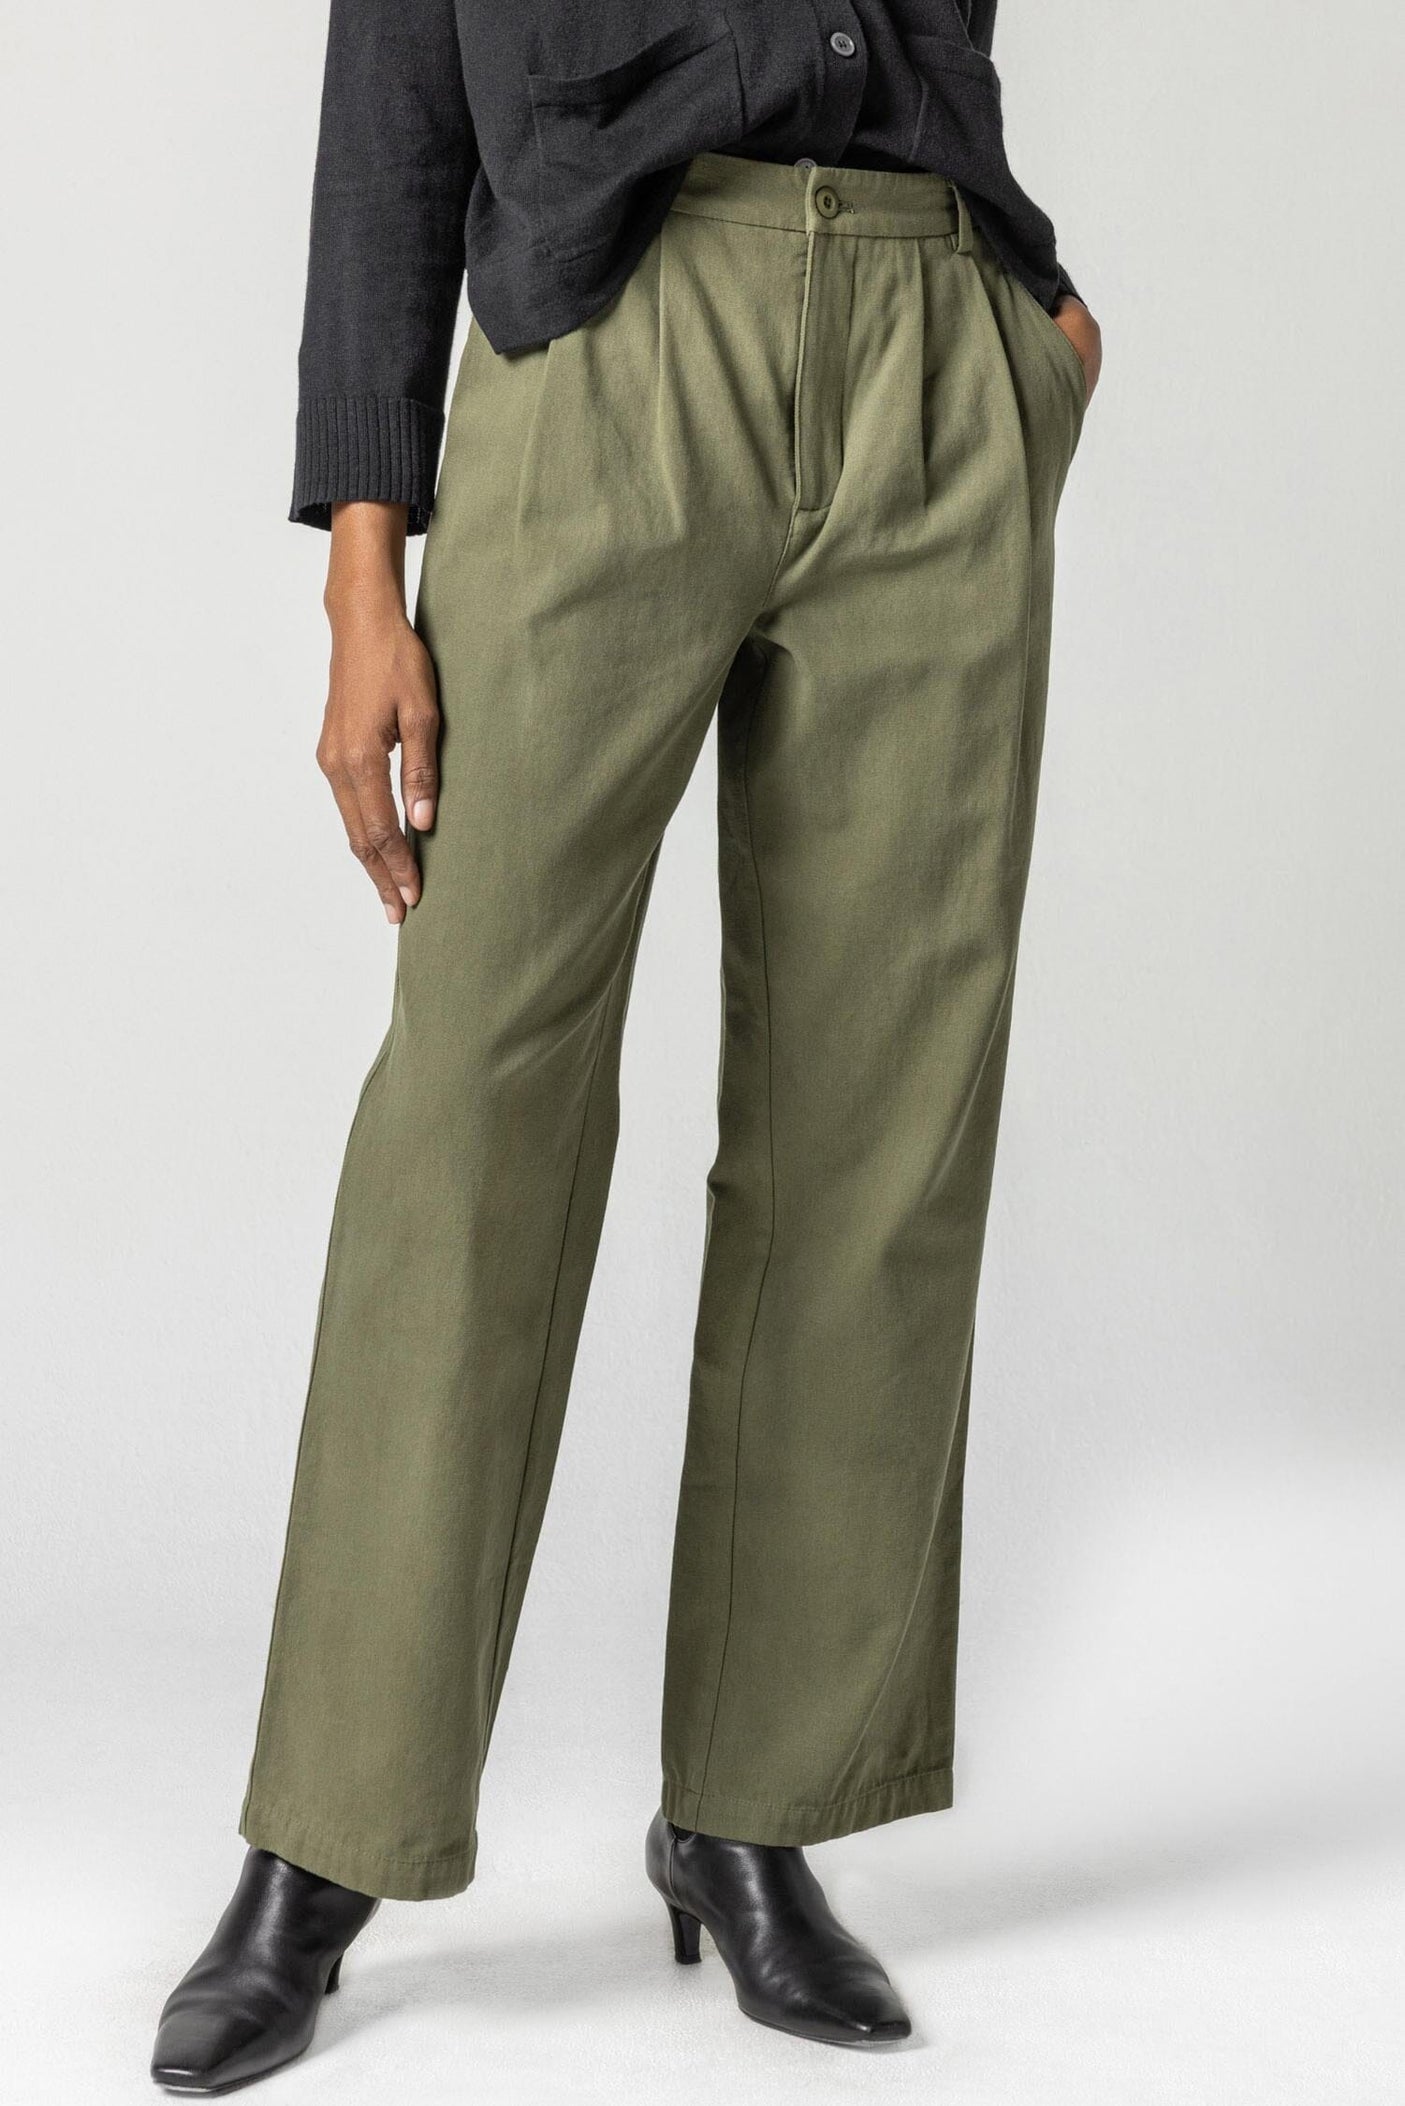 Burda Style Pleat Front Pants - I sew, therefore I am